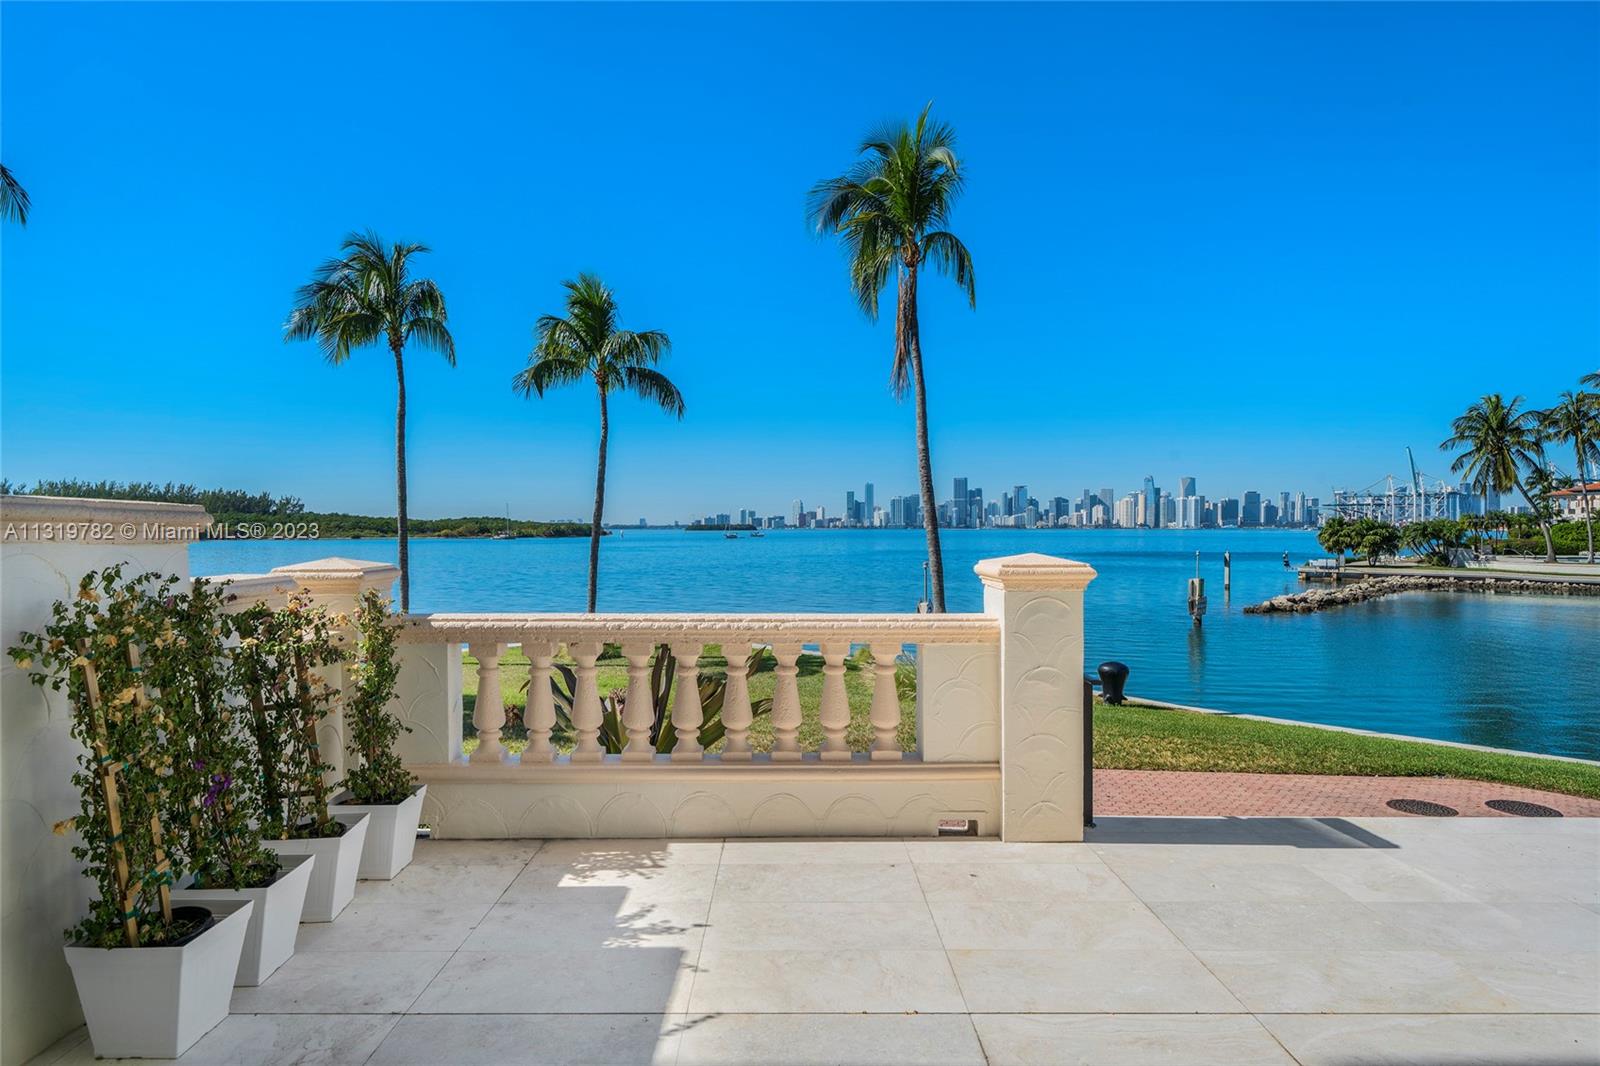 This most sought-after ground floor 3BR/3+1BA corner unit sits on the point of Fisher Island providing spectacular sunsets over the downtown Miami Skyline & panoramic unobstructed views of Biscayne Bay, Fisher Island Marina & Virginia Key. This magnificent unit has been totally remodeled in 2022 & boasts fine oak hardwood floors, 3,317 SF w/ open living and dining areas surrounded by walls of glass w/ direct bay/city views & access to a full wrapping terrace. A Chef’s kitchen sports La Corneu cooktop, top-of-the-line appliances & crystal agate center island with eat-in seating. The sumptuous principal suite features a seating area, large walk-in closets and stunning principal bathroom w/ dolomite floors & walk-in rain shower. The 2 other bedrooms each uniquely designed with en-suite baths.